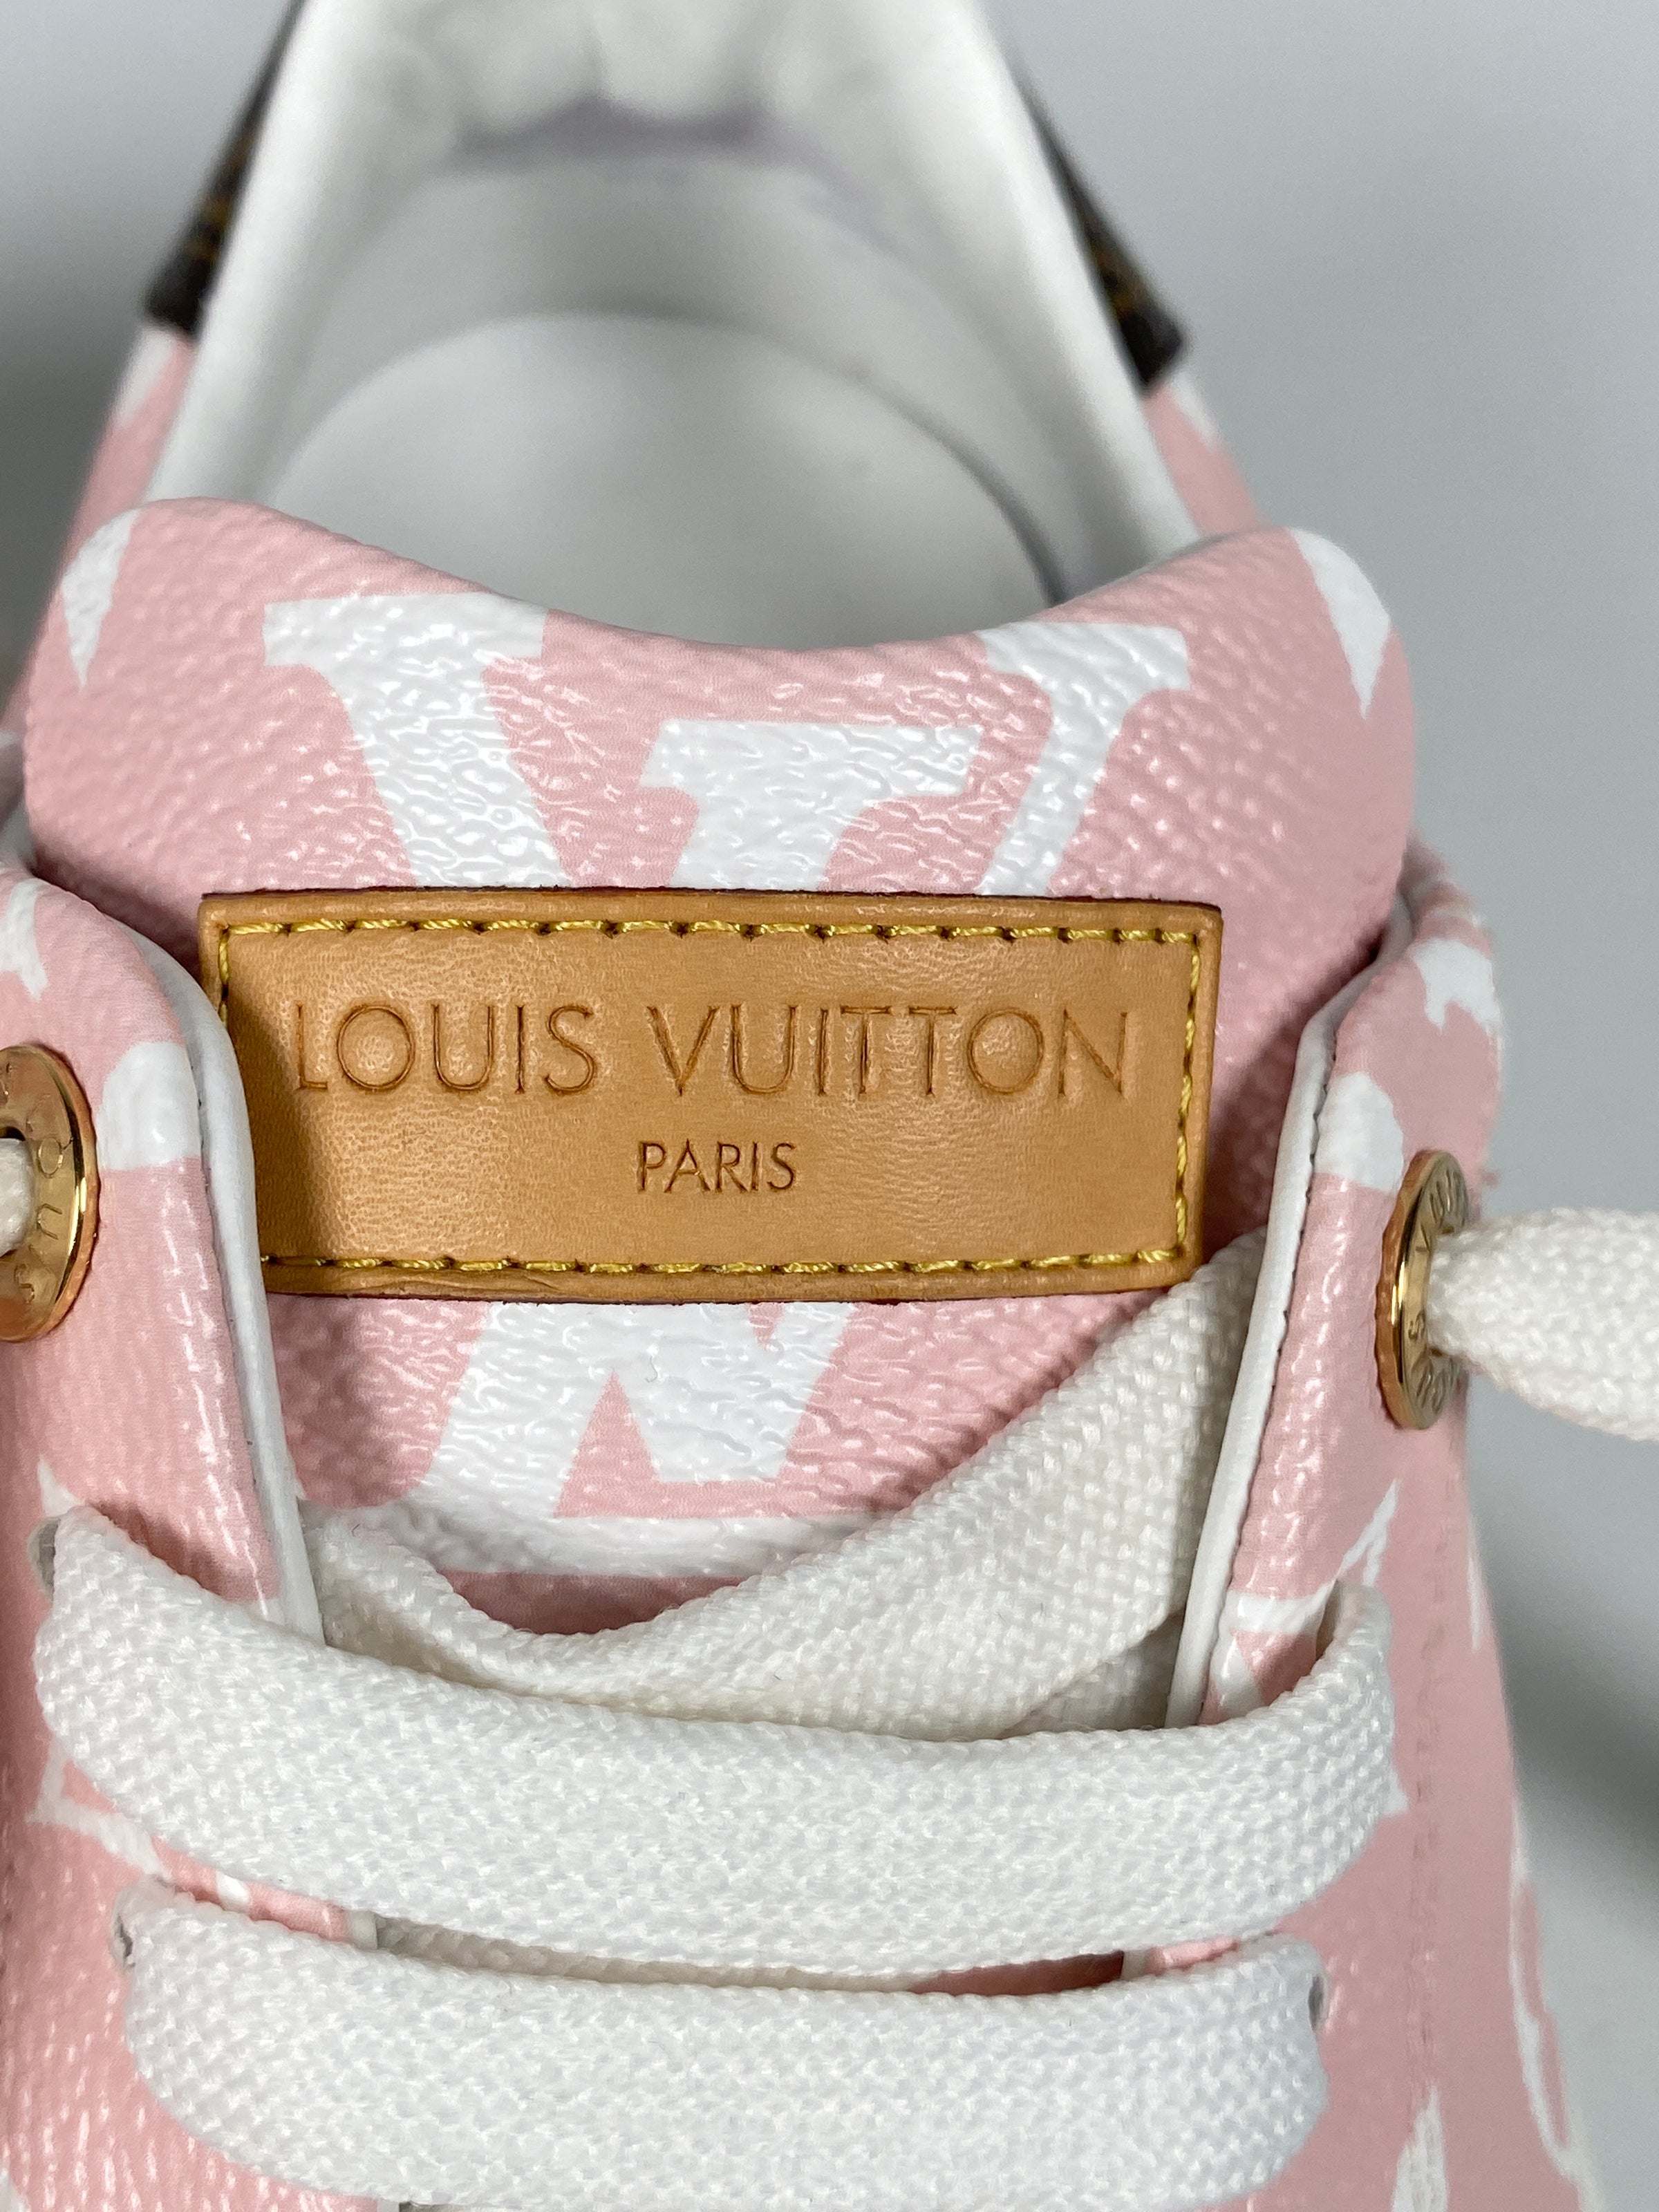 Louis Vuitton New Luxury Limited Edition Pink Shoes, Sneaker